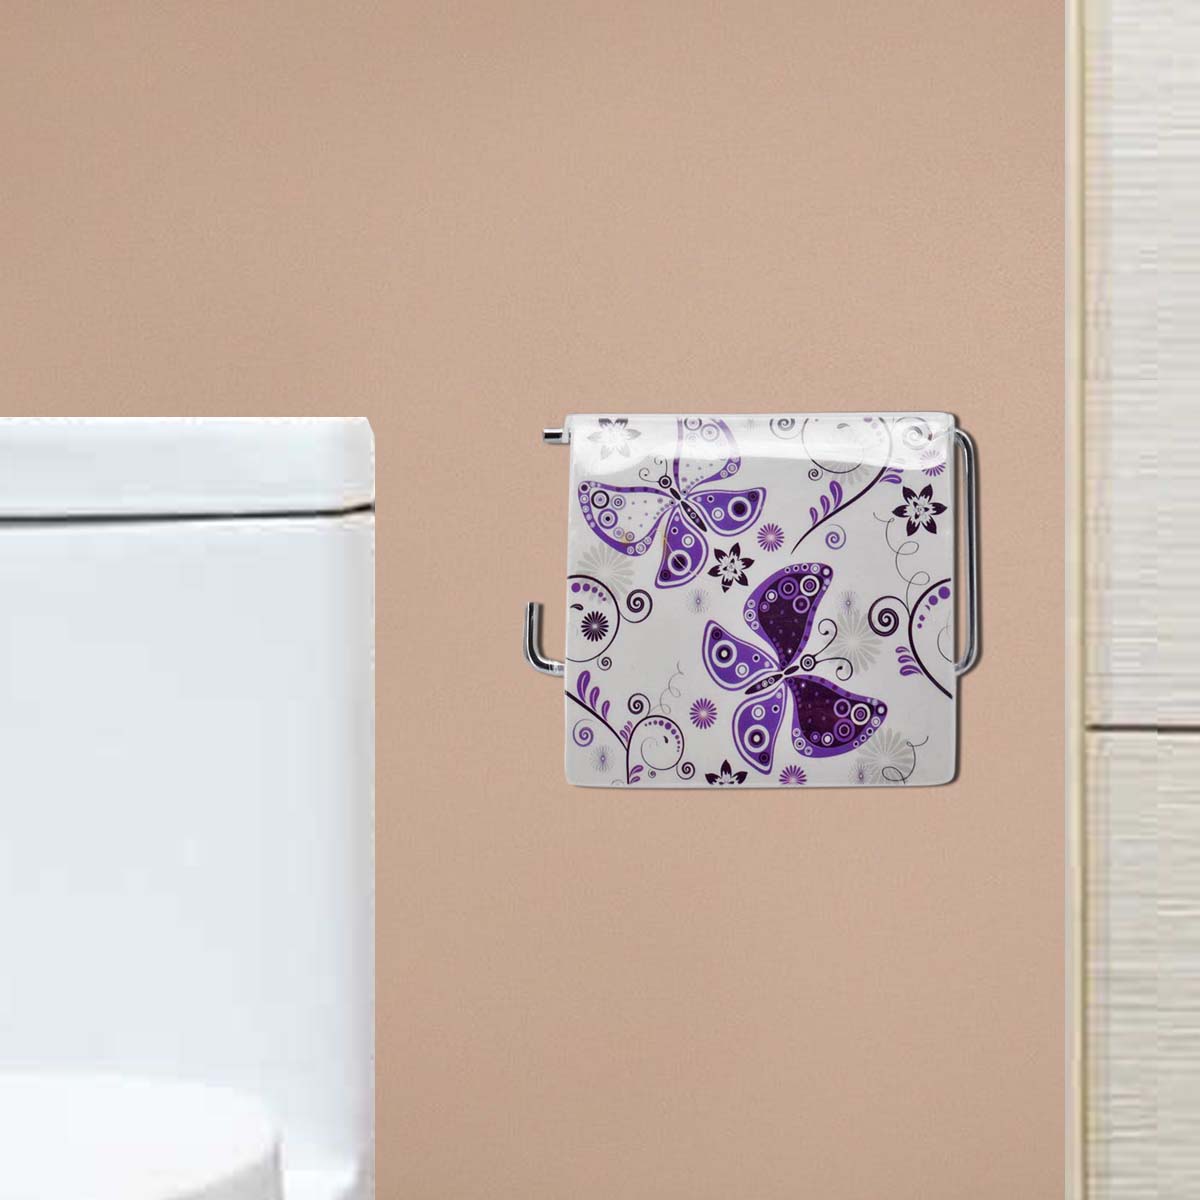 Kookee Wall Mounted Acrylic Tissue Paper, Toilet Roll Holder for Home, Kitchen, Cabinet and Bathroom (JS160803)